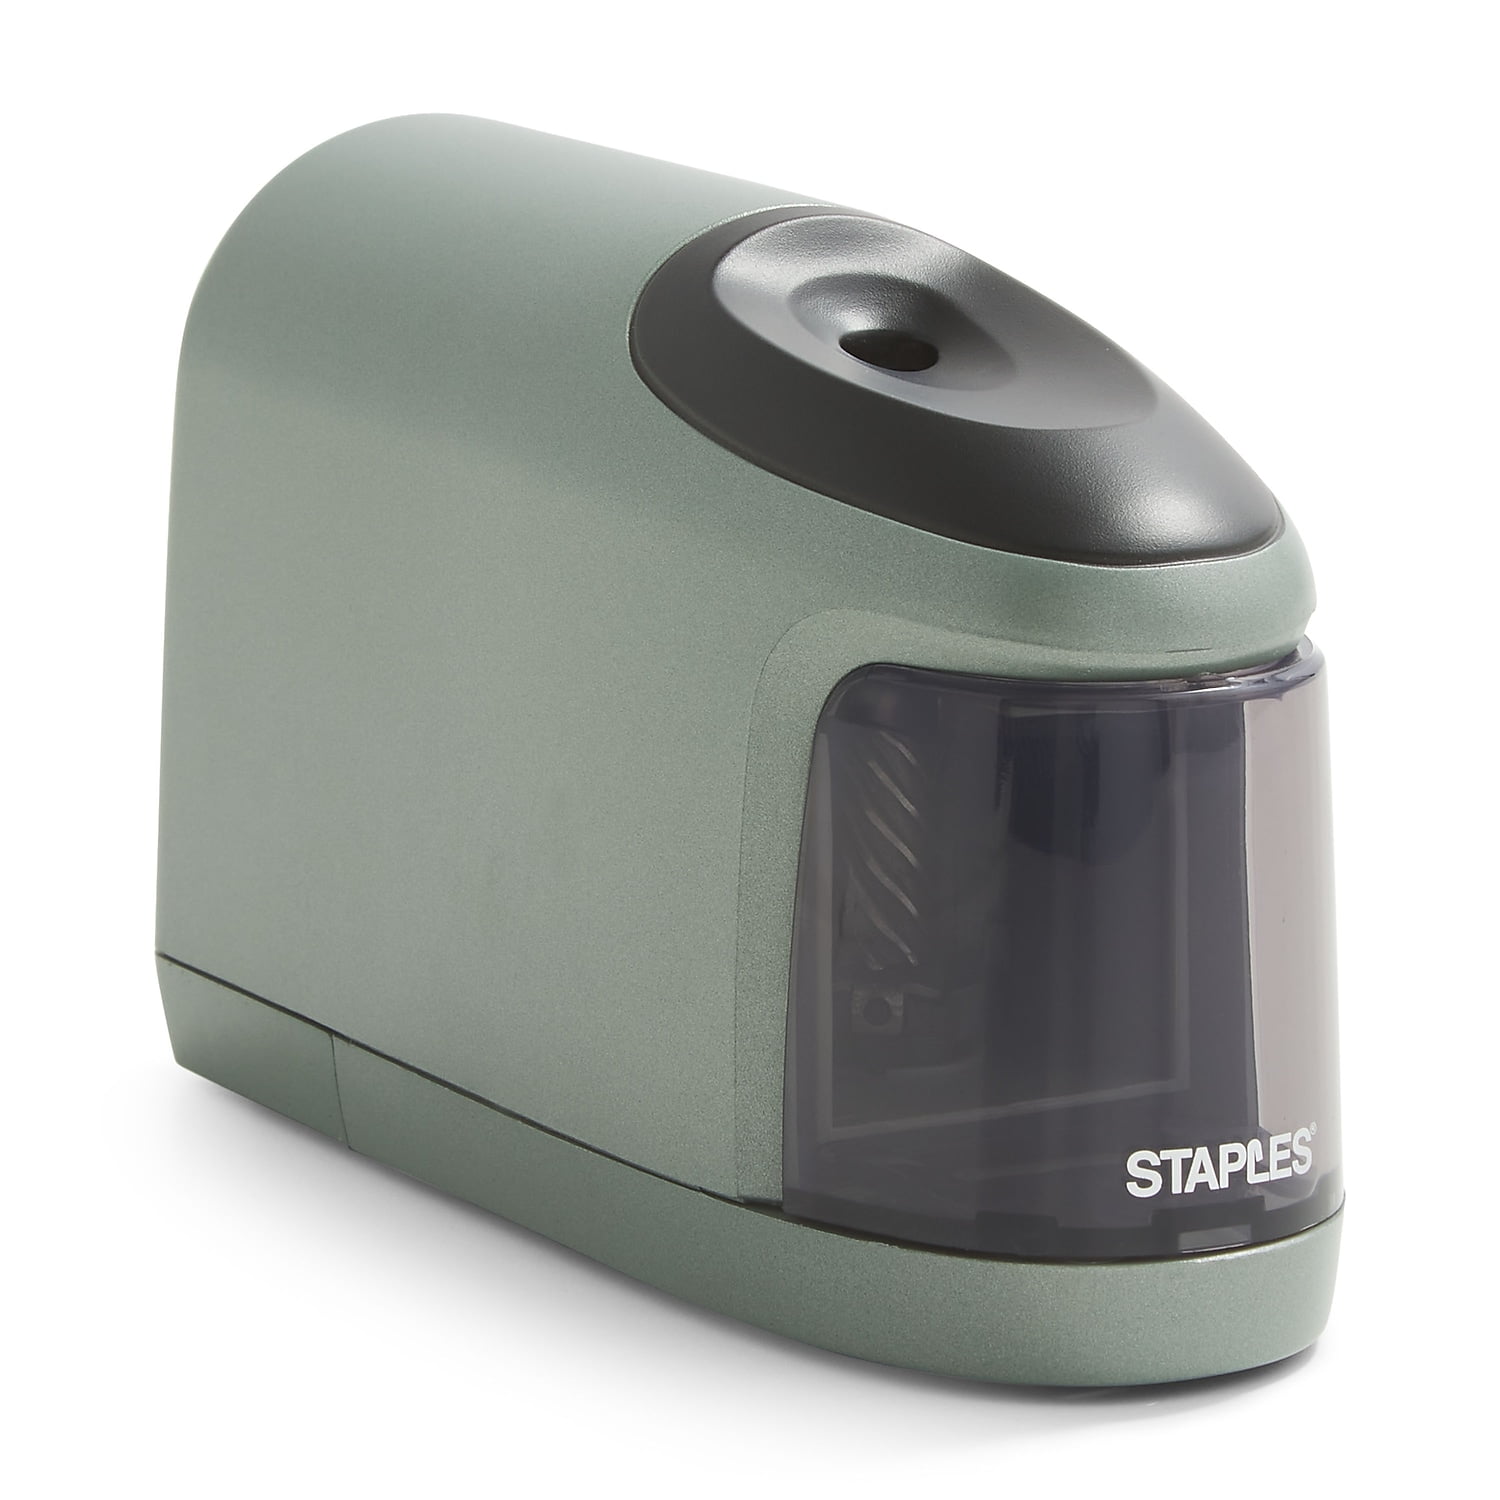 Electric Pencil Sharpener – new a toy